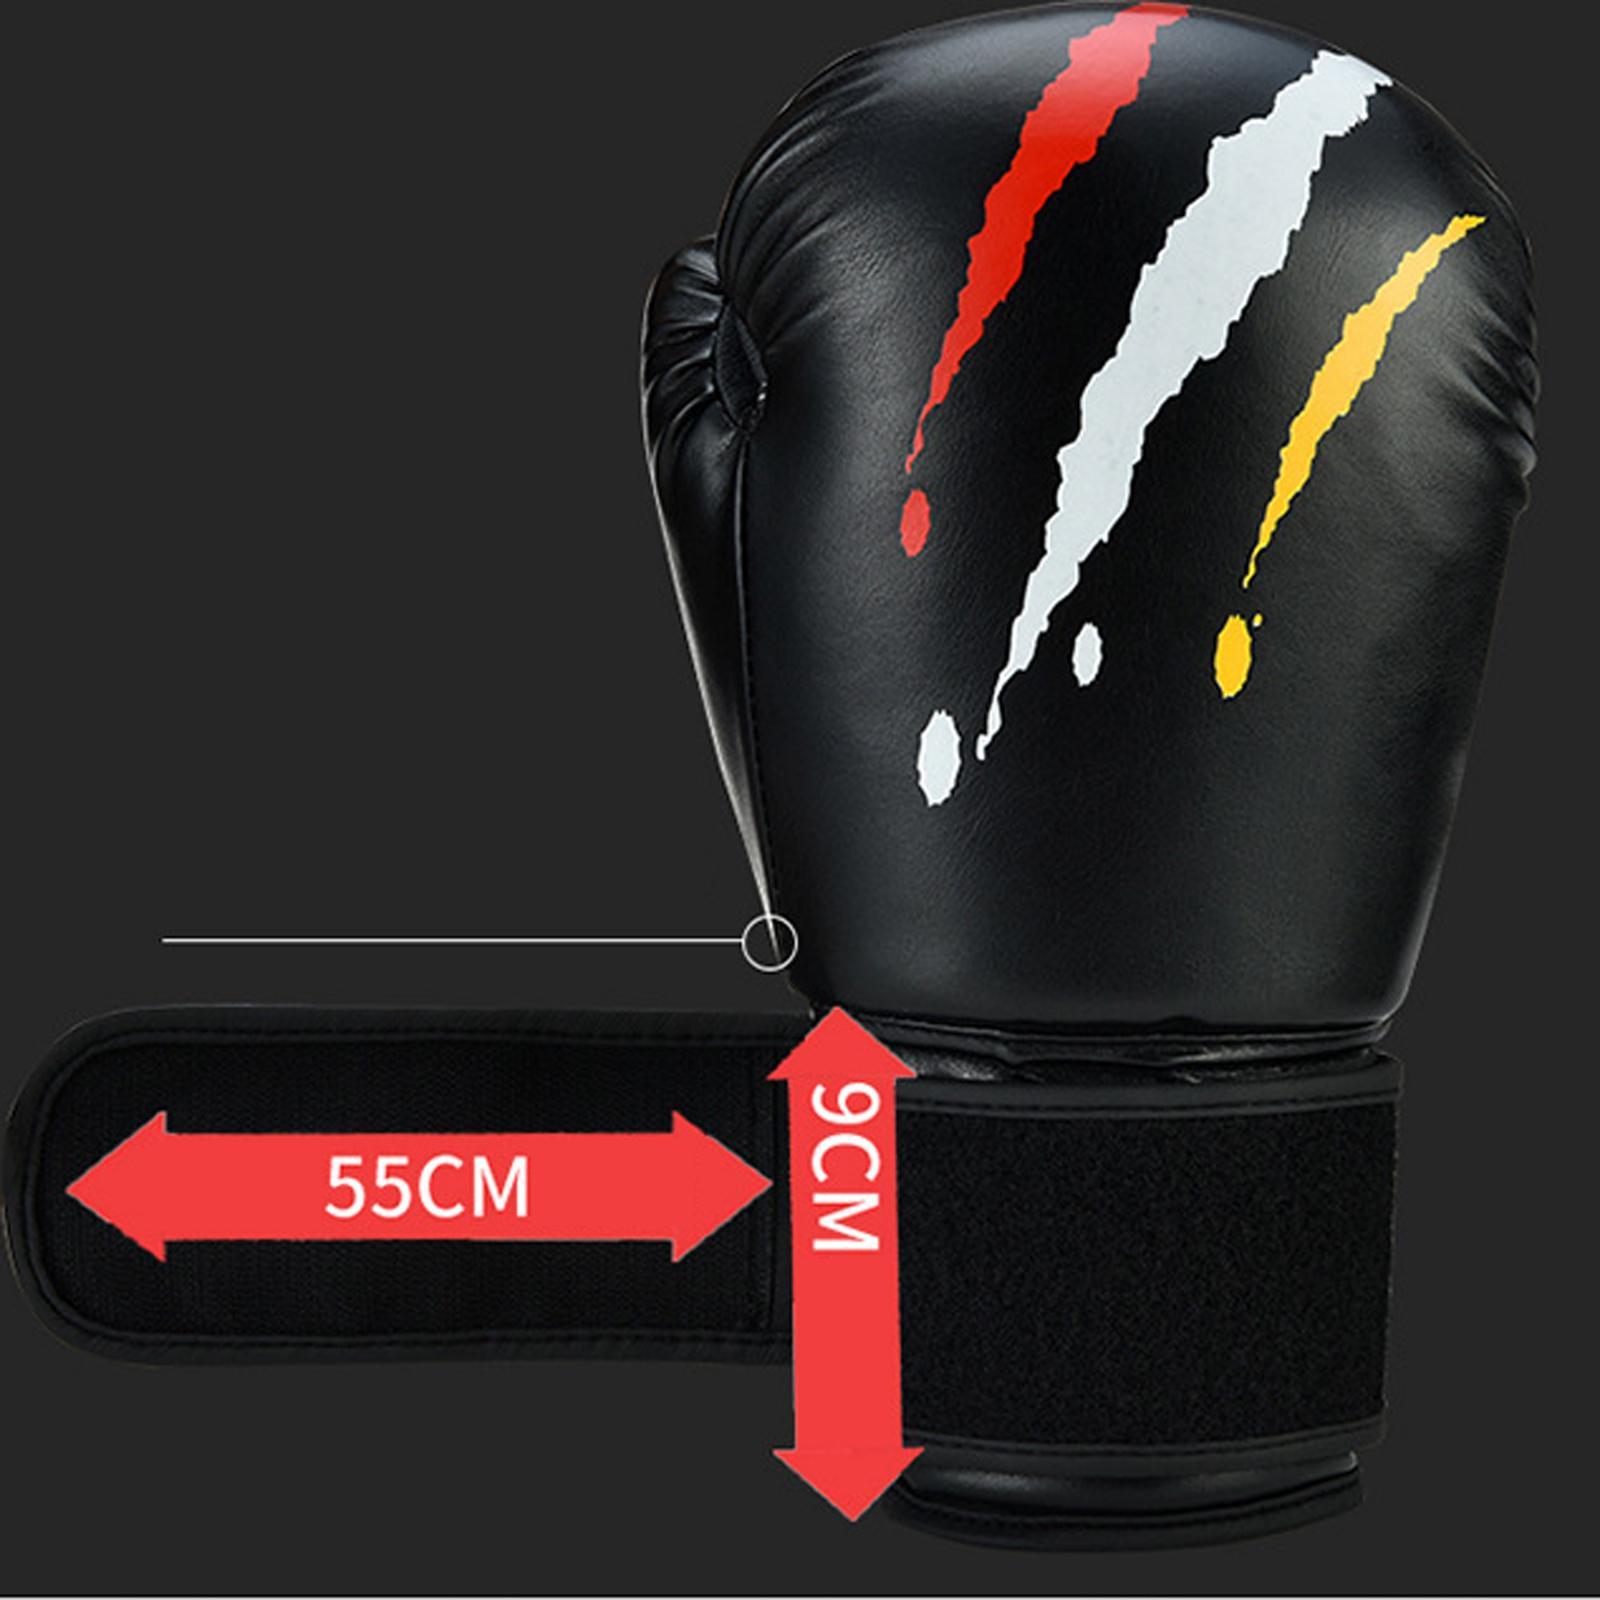 Boxing Practice Gloves Sparring Muay Thai Workout Fight Punching Bag Mitts Red 8oz